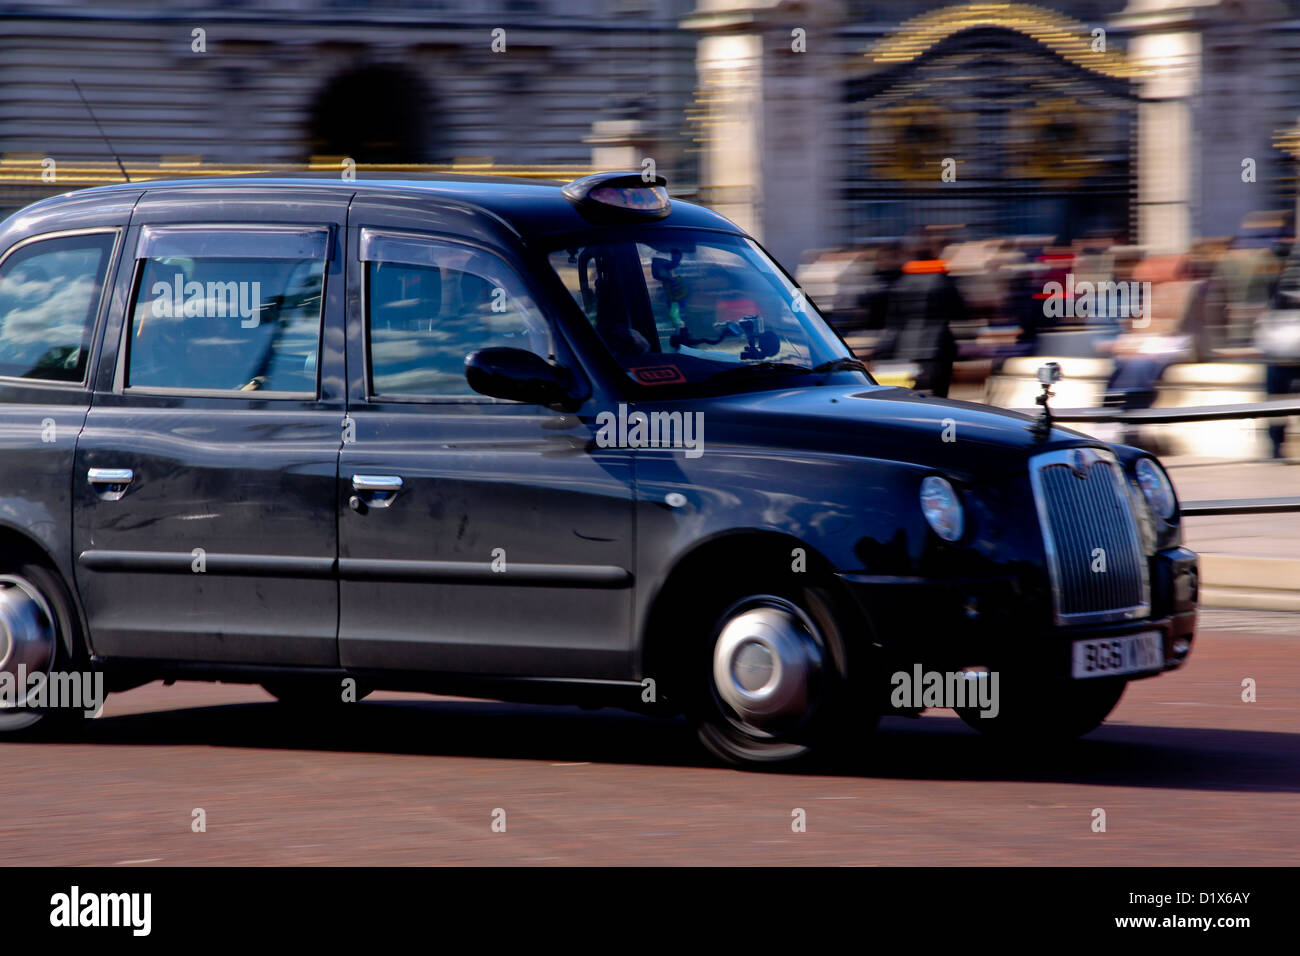 London black taxi cab in front of Buckingham Palace Stock Photo